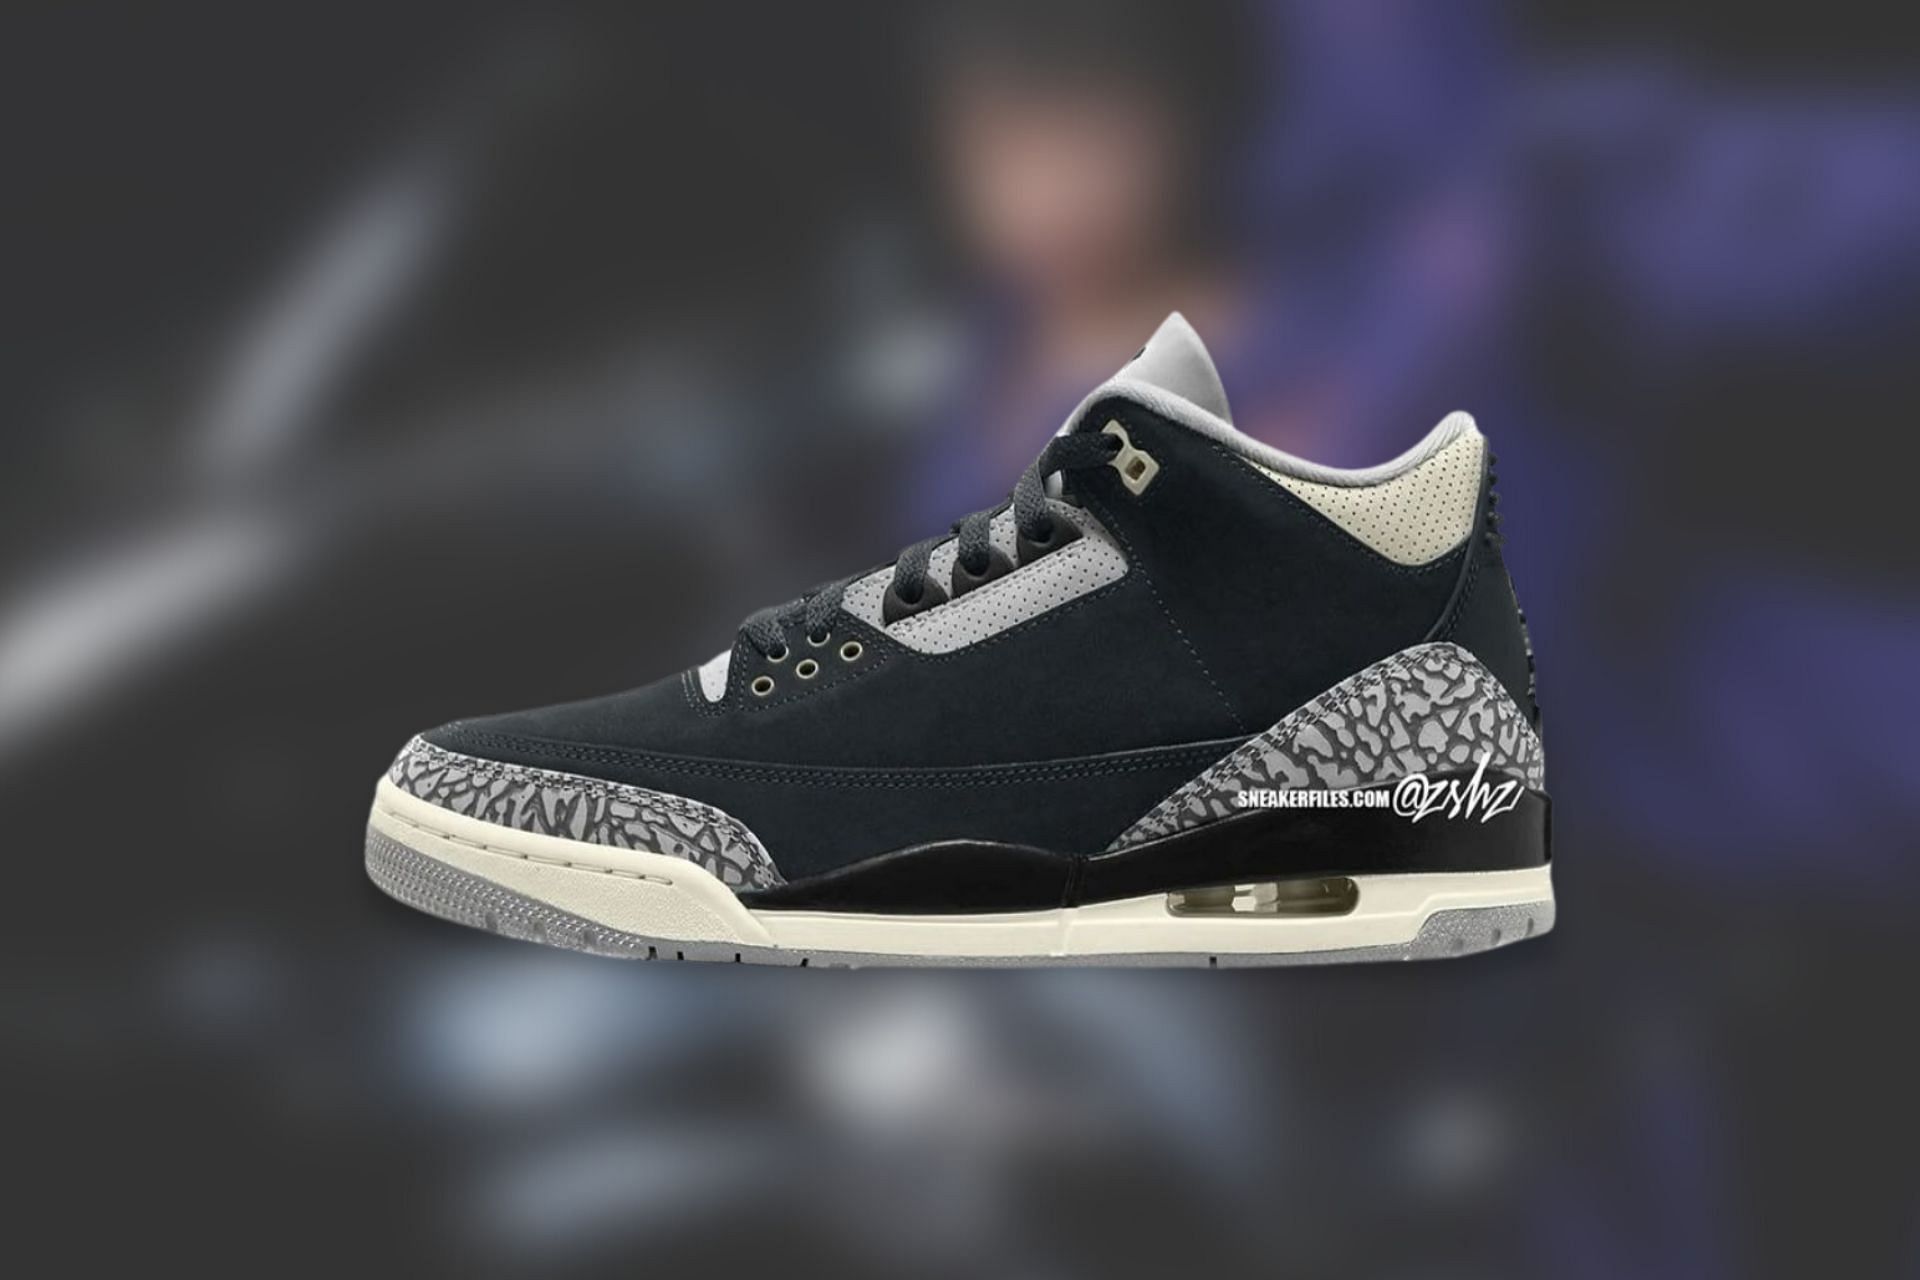 Nike: Air Jordan 3 Retro “Off Noir Cement” shoes: to buy, price, and more details explored